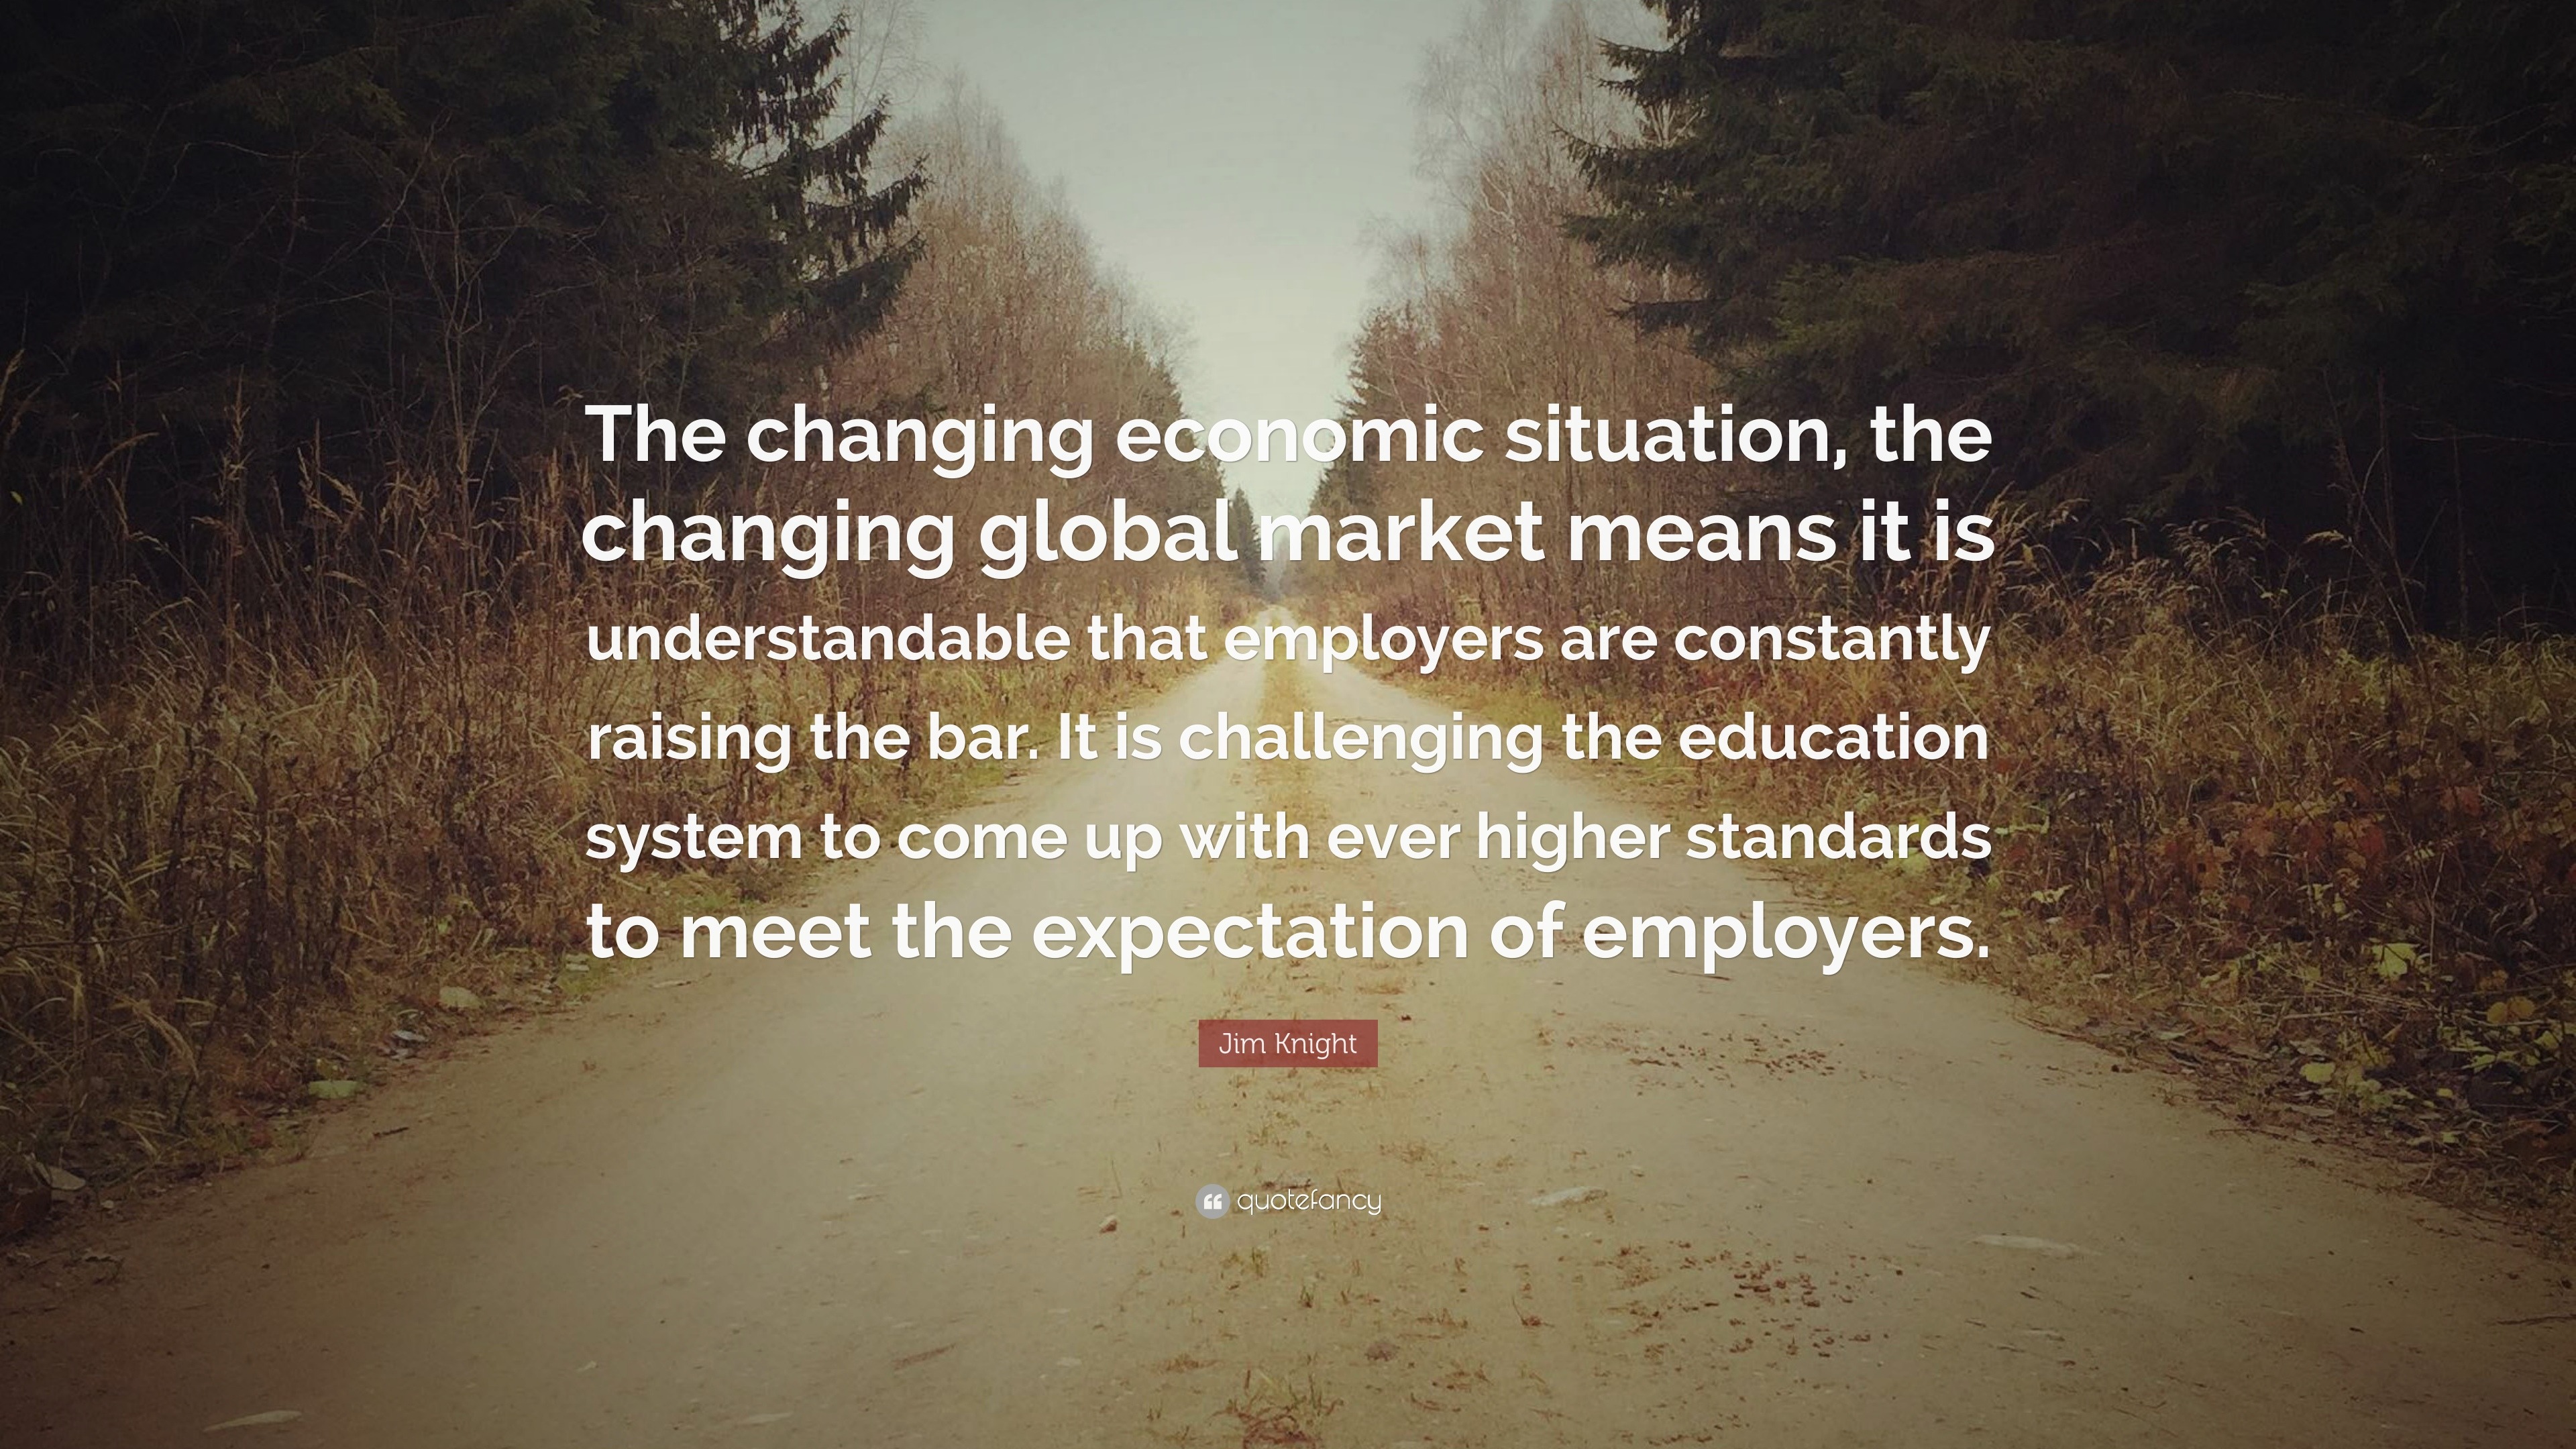 Jim Knight Quote: “The changing economic situation, the changing global